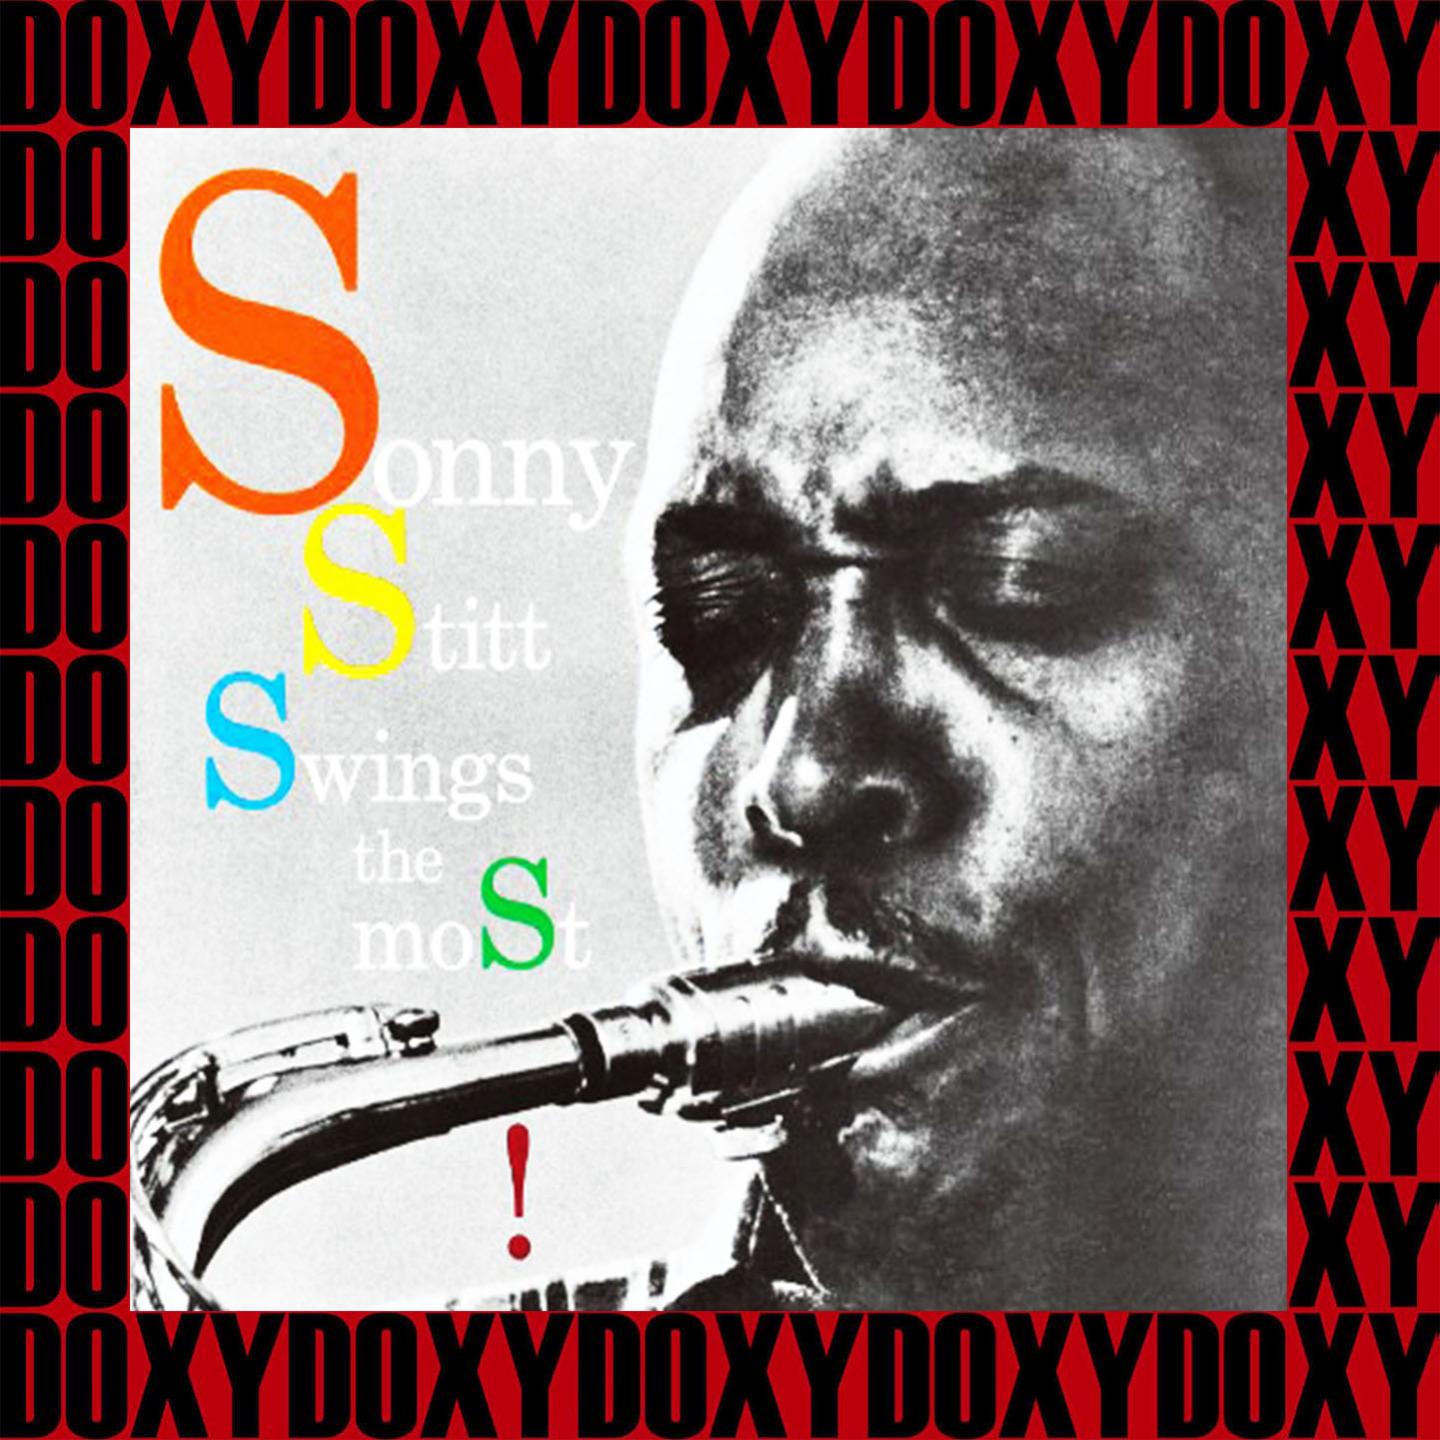 Sonny Stitt Swings the Most (Remastered Version) (Doxy Collection)